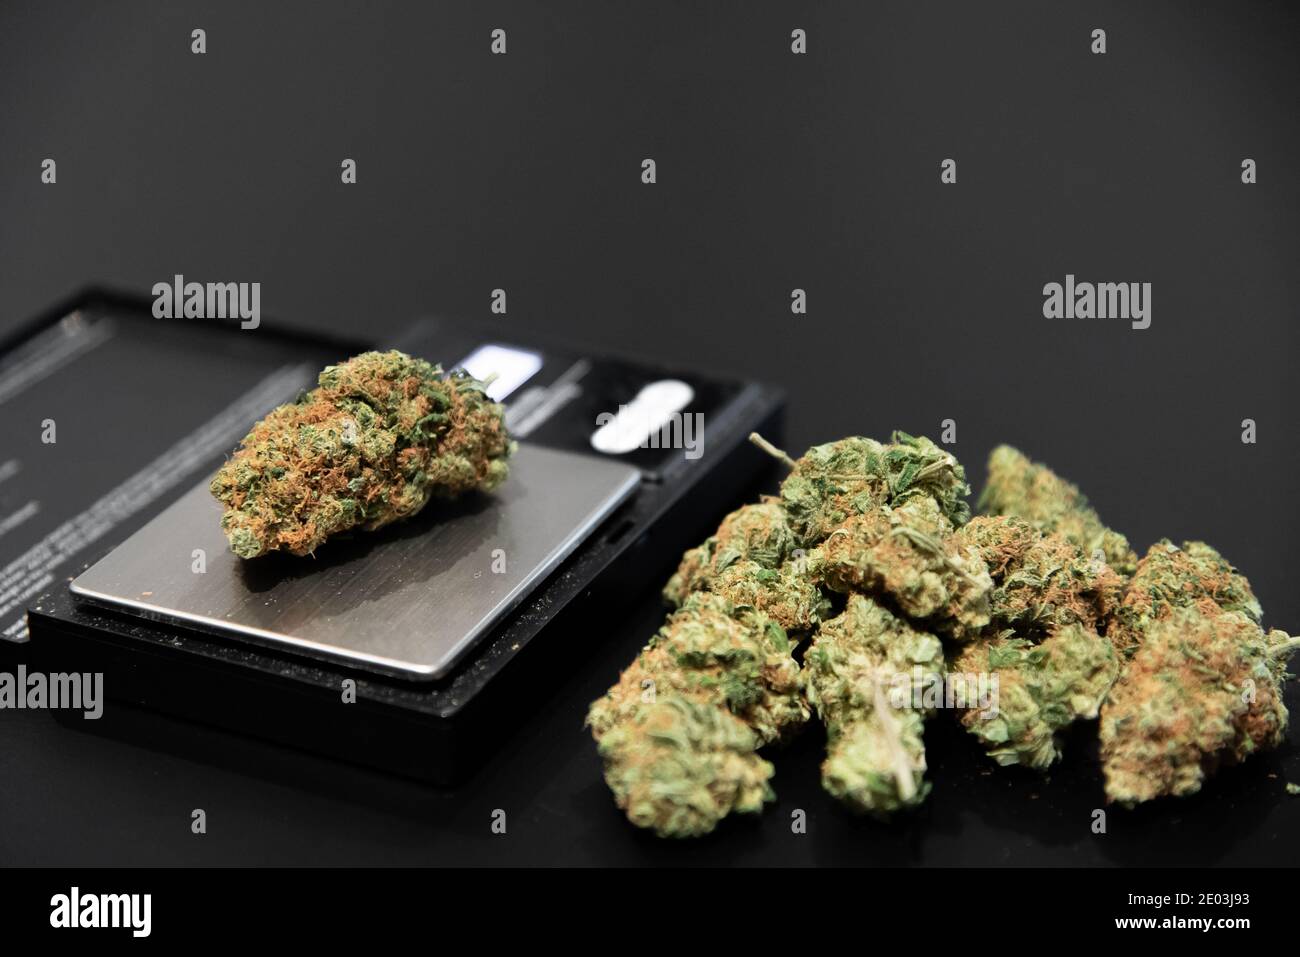 Cannabis buds and other smoking utensils Stock Photo